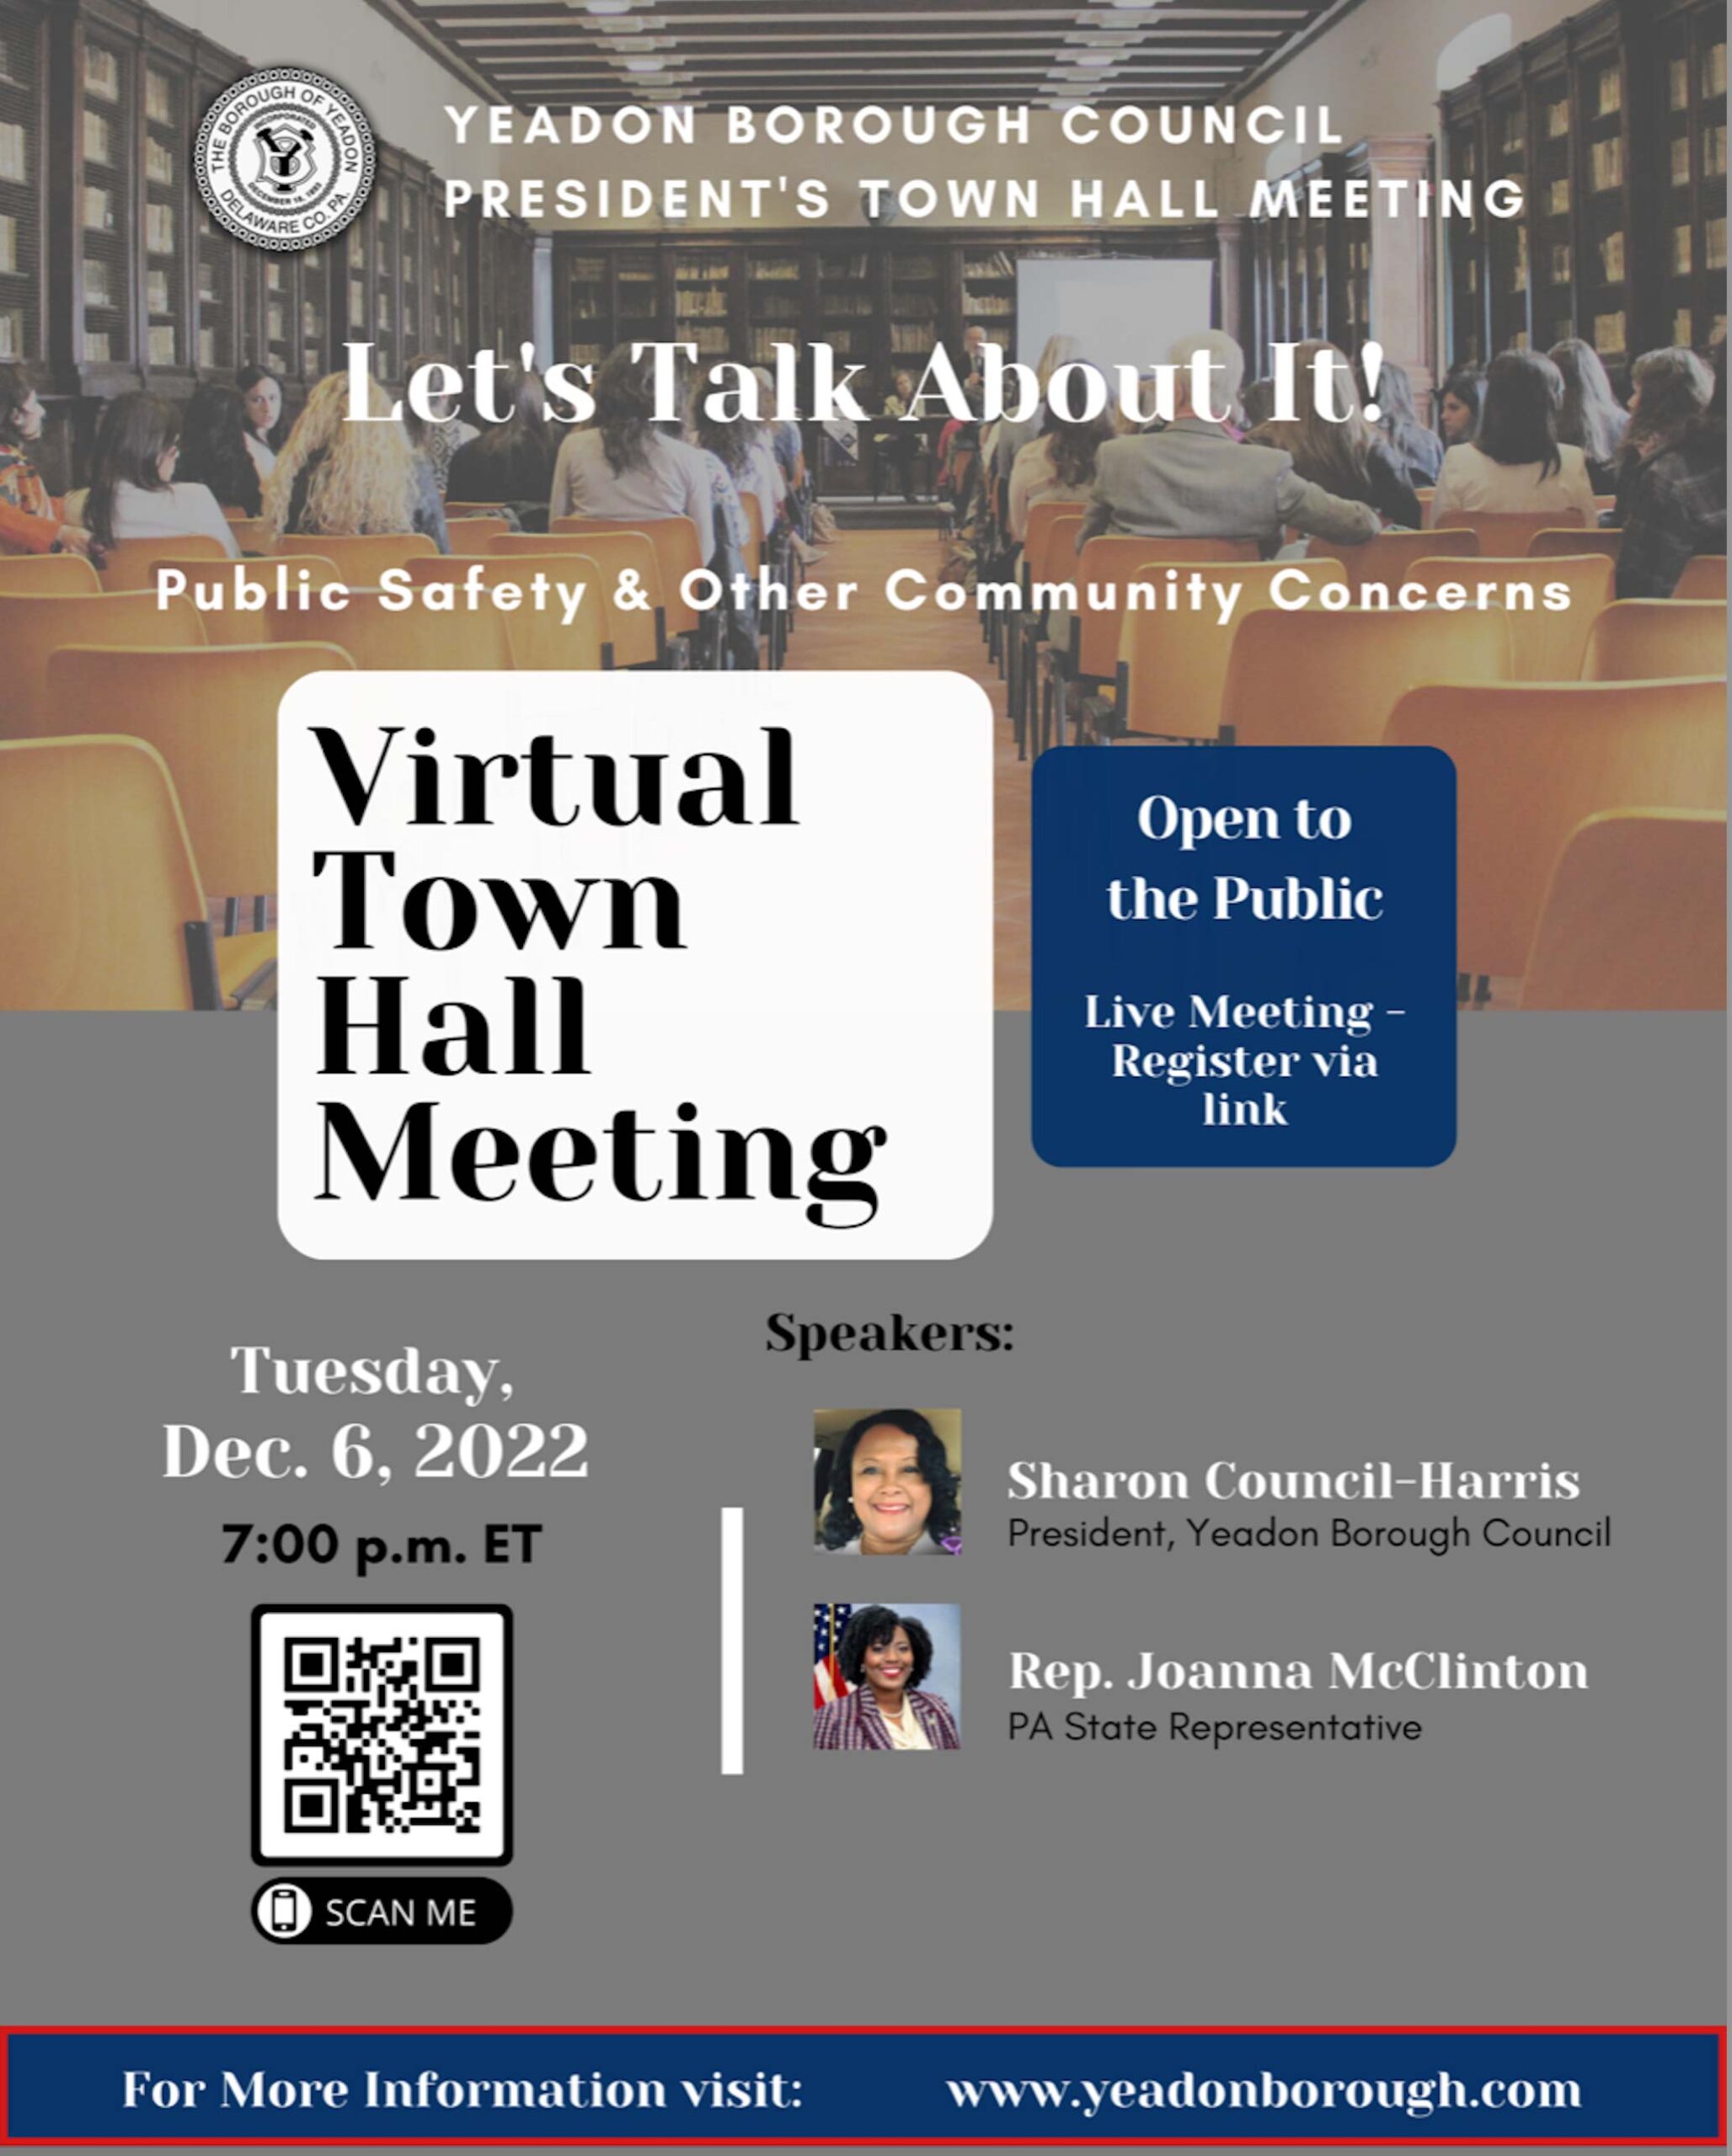 Council President's Town Hall Meeting